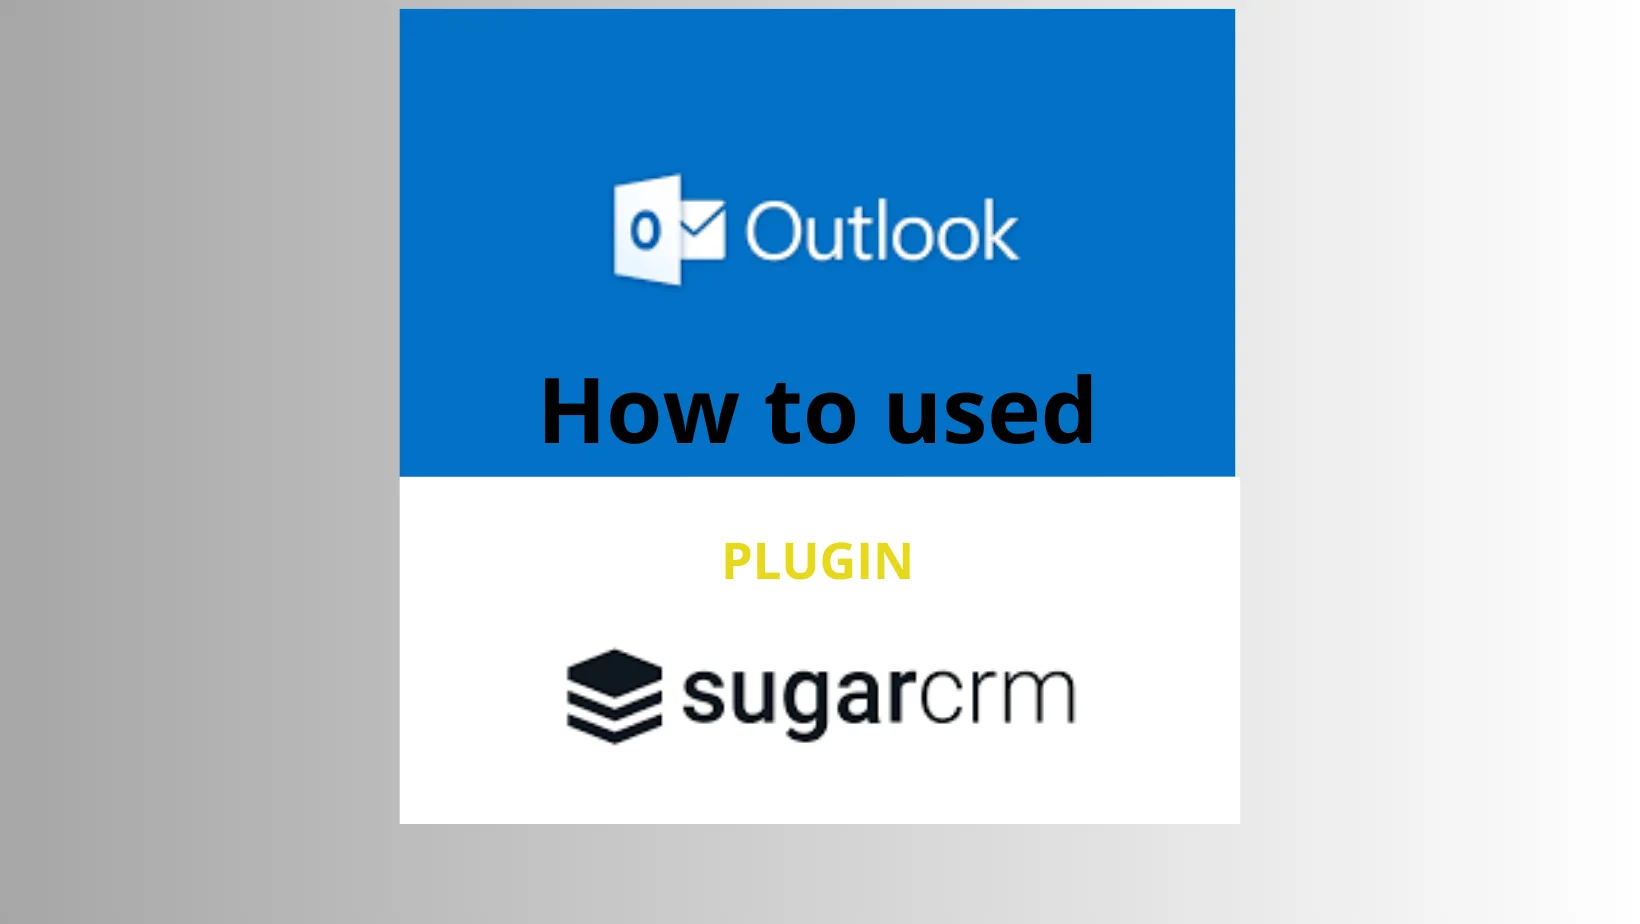 how-to-use-sugarcrm-outlook-plugin